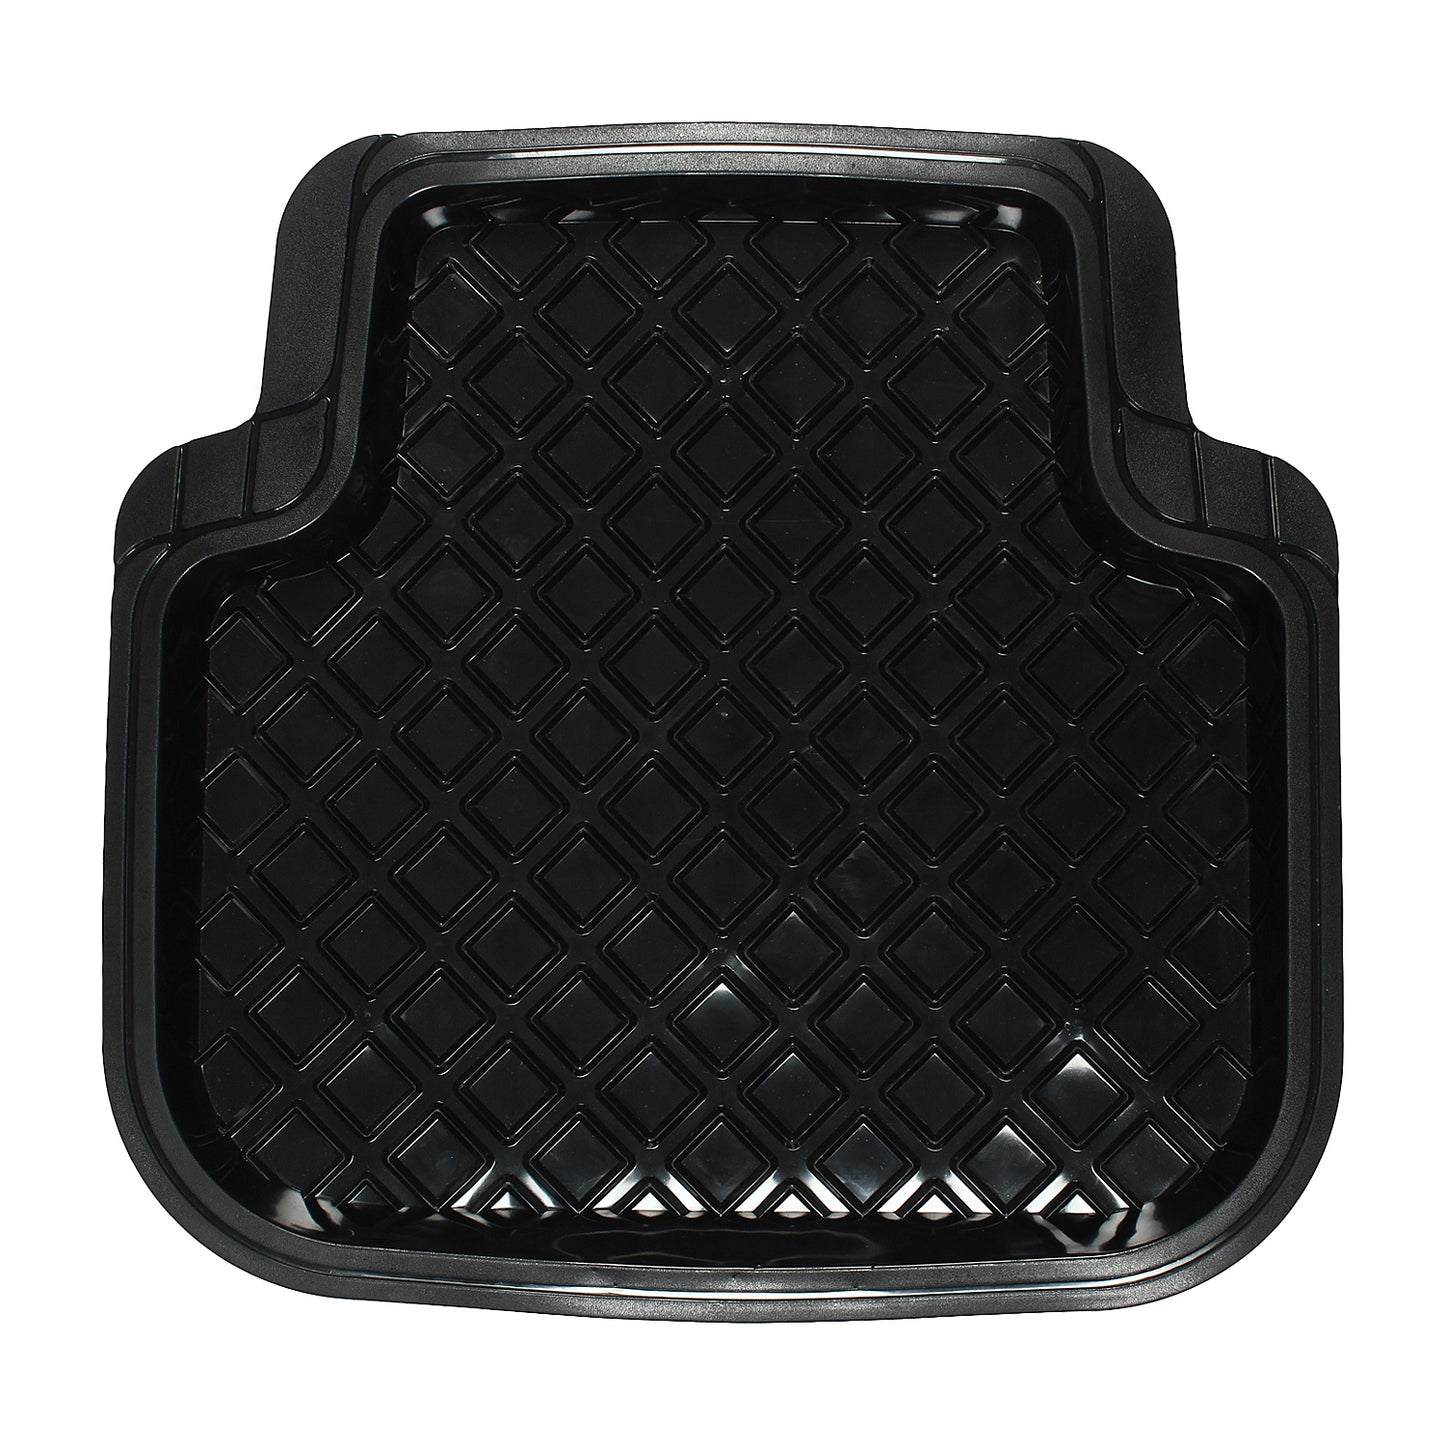 Oshotto Anti Skid Rubber Car Tray Foot Mat for All Car Trays (Set of 5, Black)